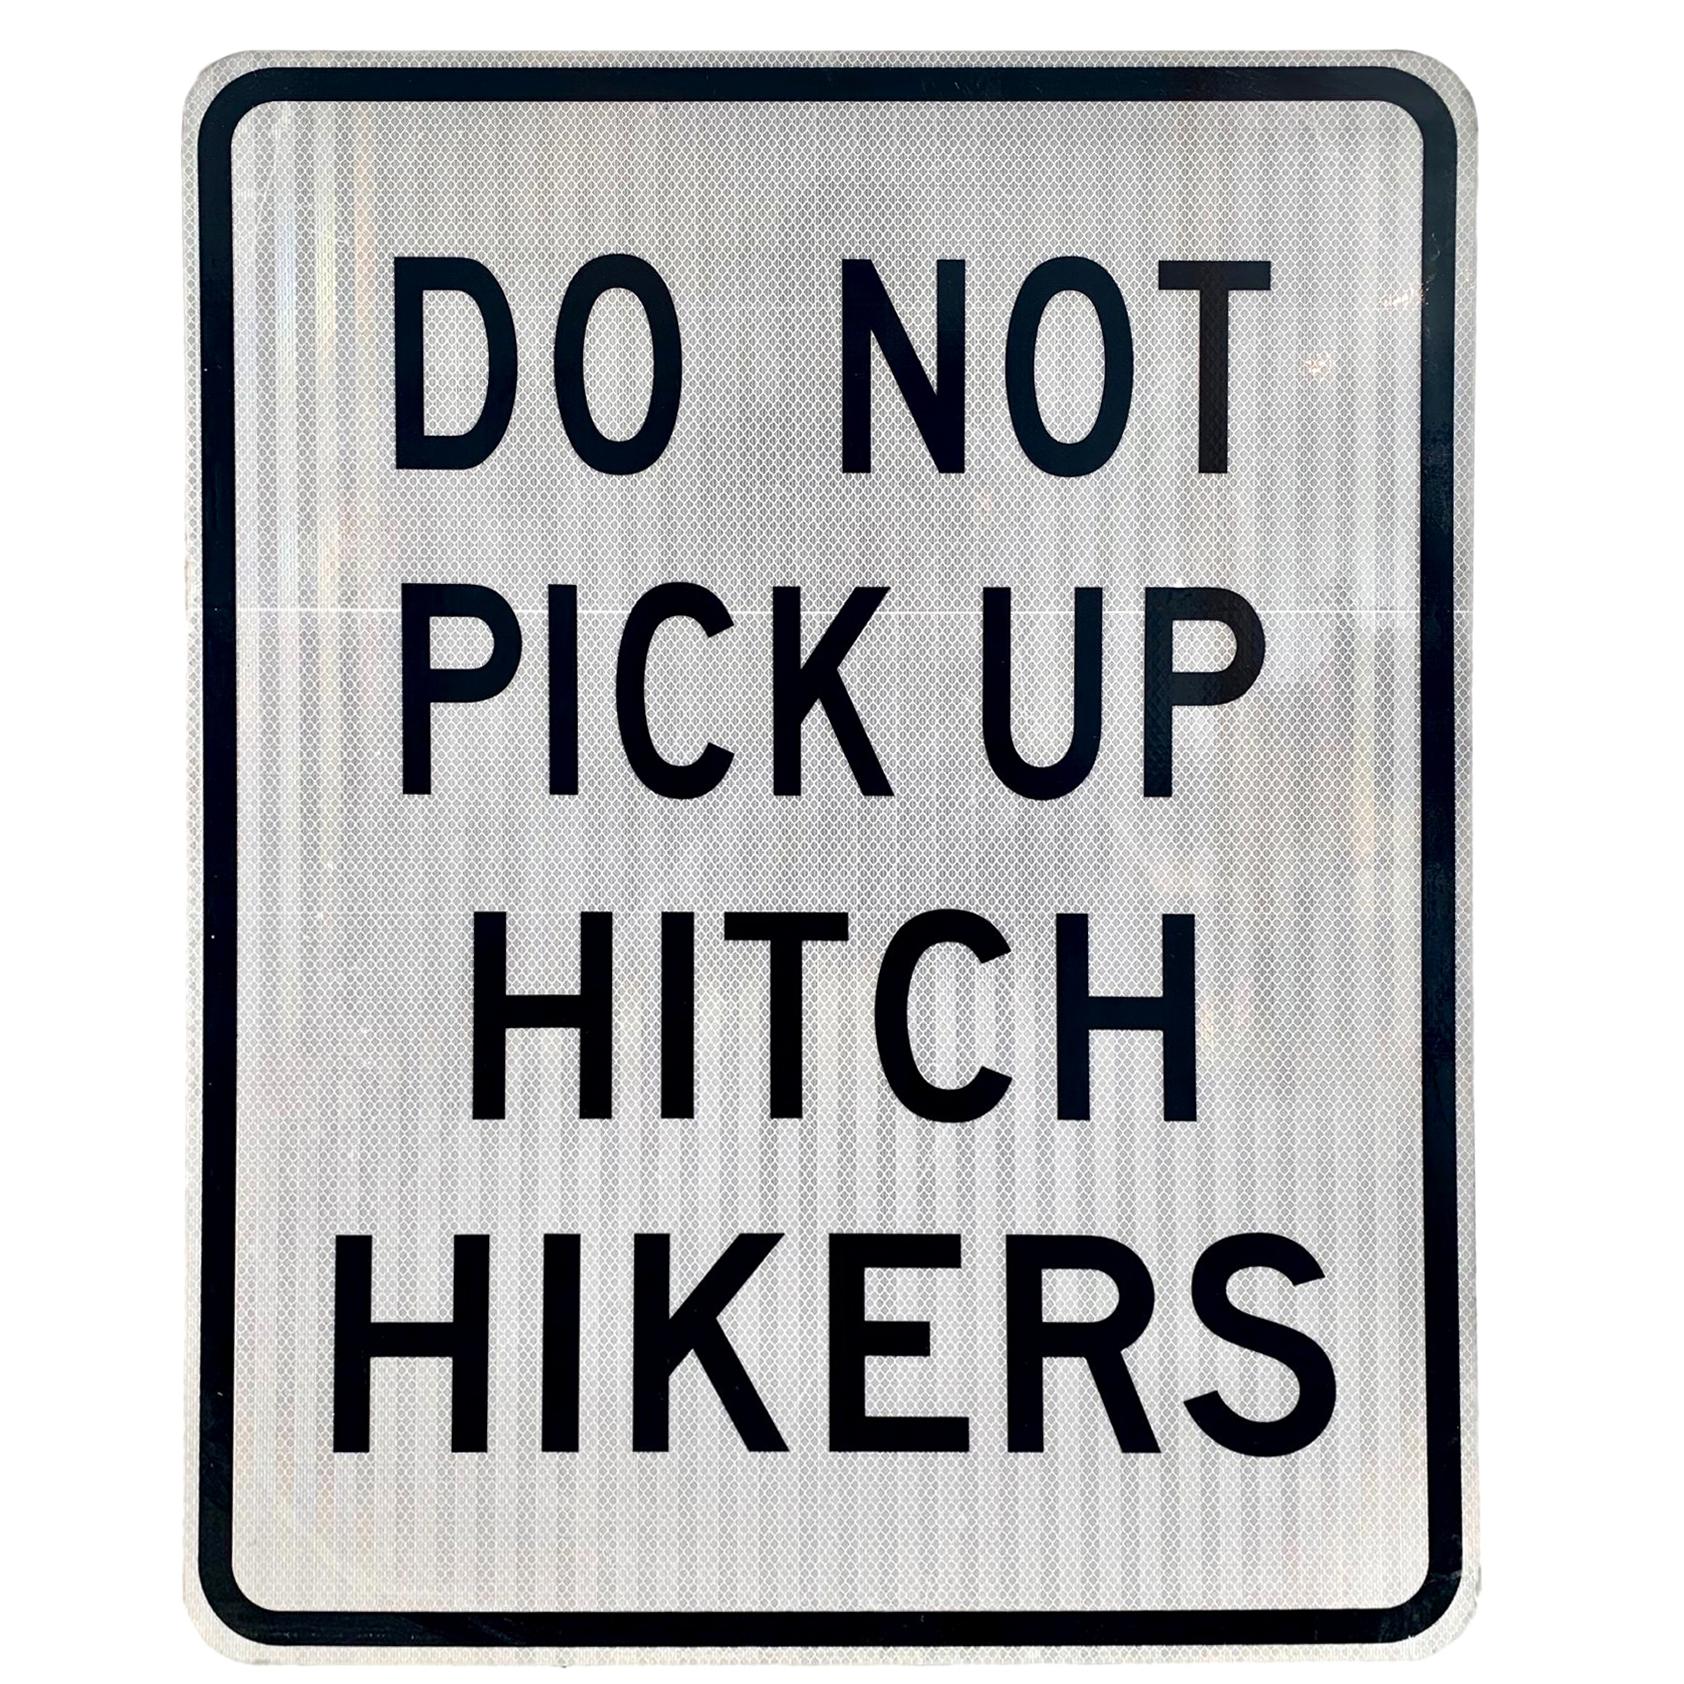 Do Not Pick Up Hitch Hikers Vintage Highway Sign